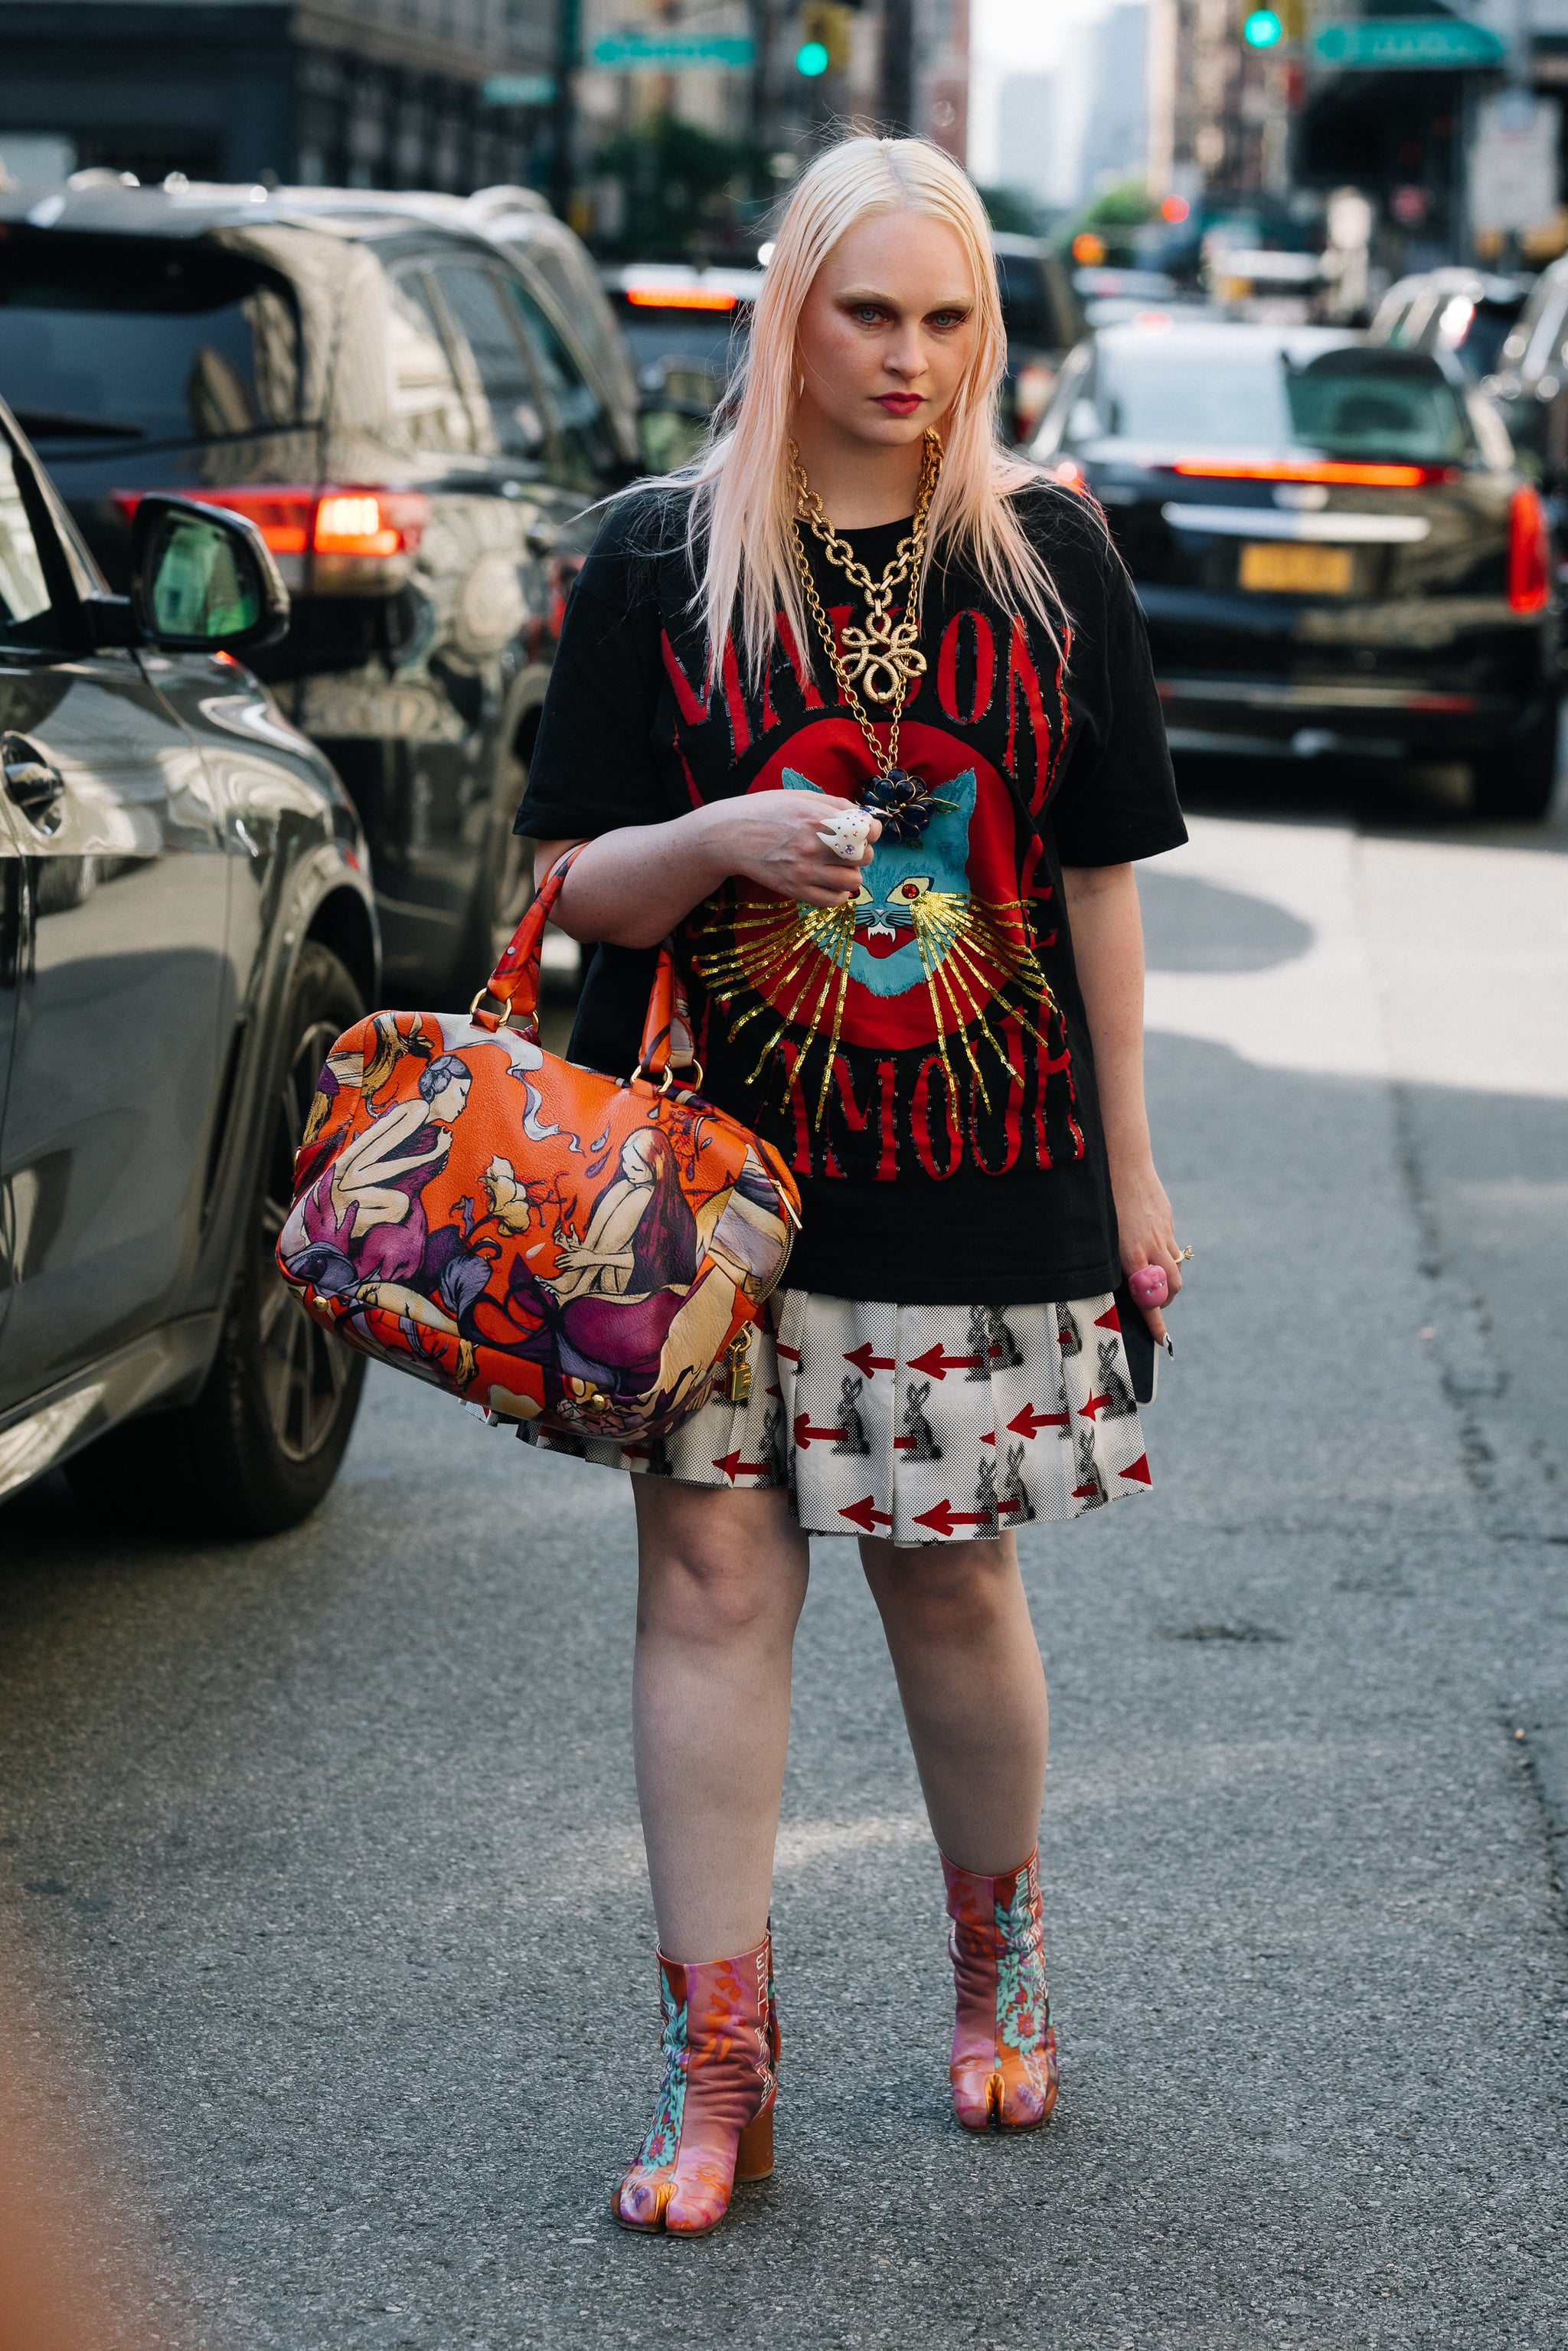 The Best Bags of NYFW Spring 2016 Street Style – Days 7 & 8